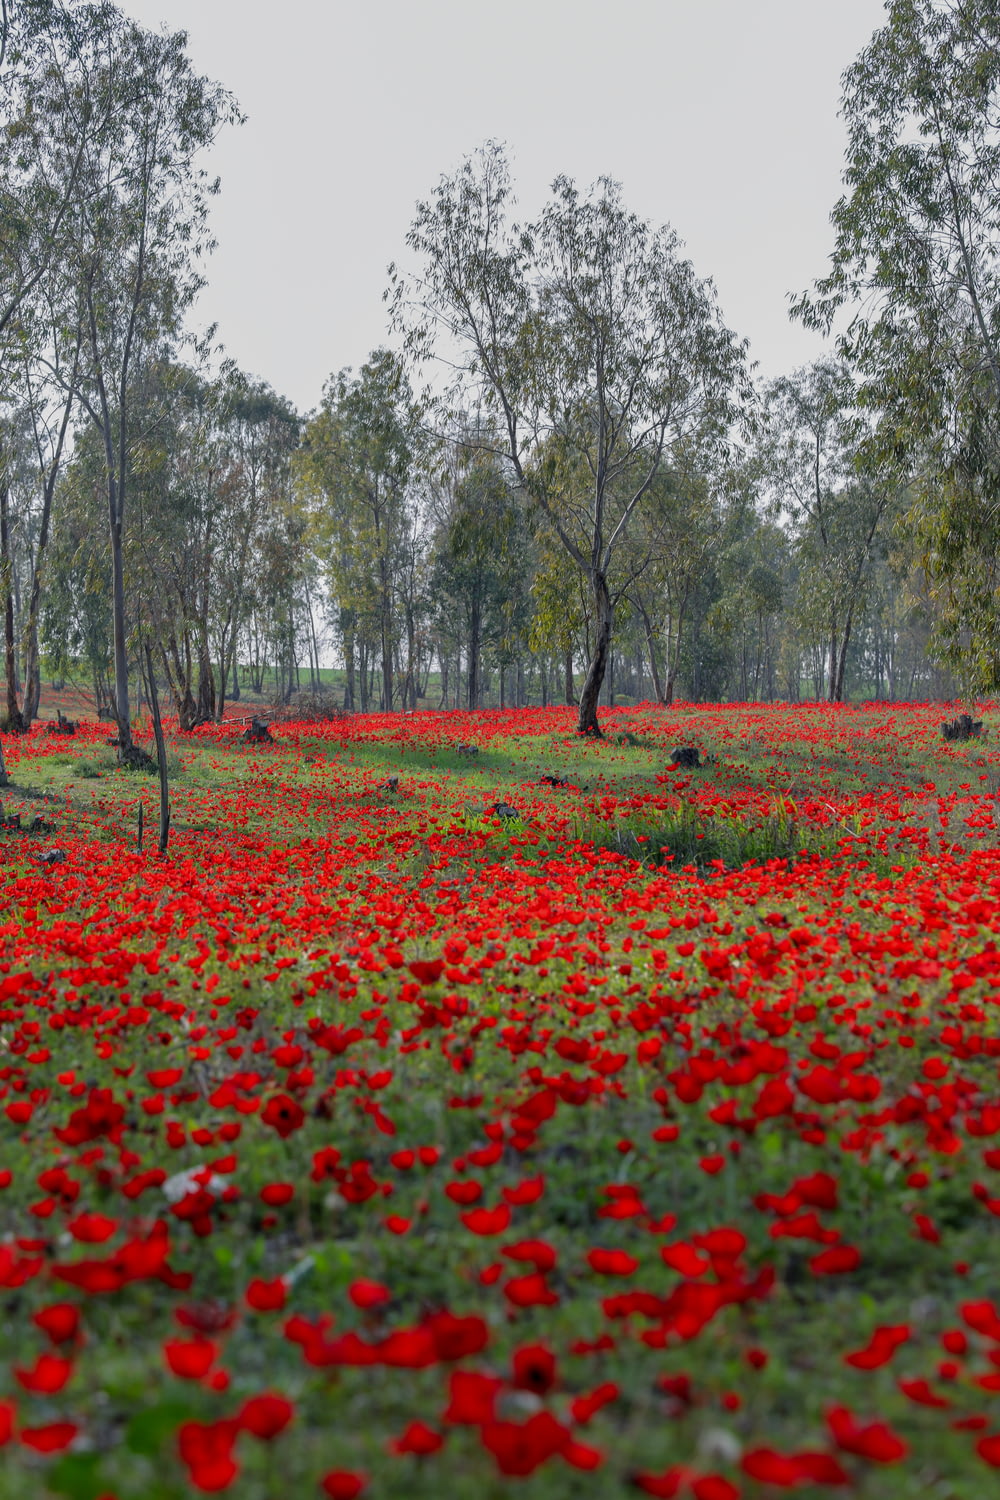 red flower field near trees during daytime